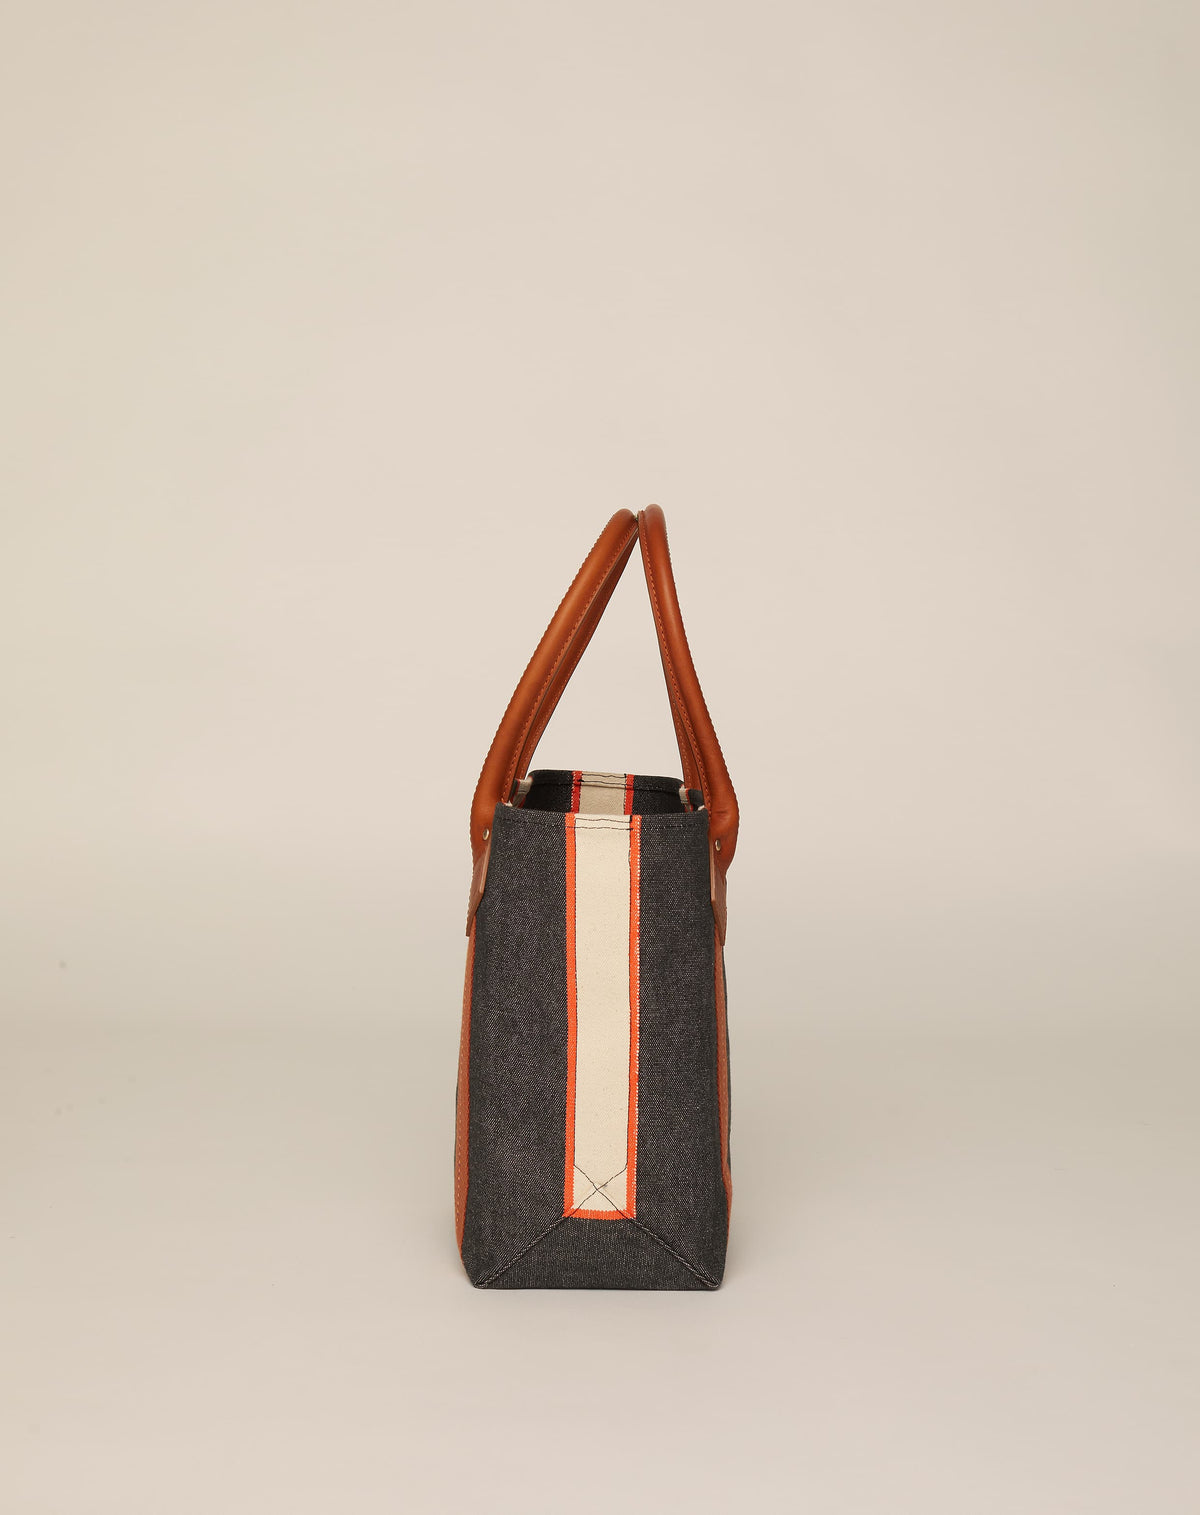 Side image of small classic canvas tote bag in washed black colour with tan leather handles and contrasting stripes.